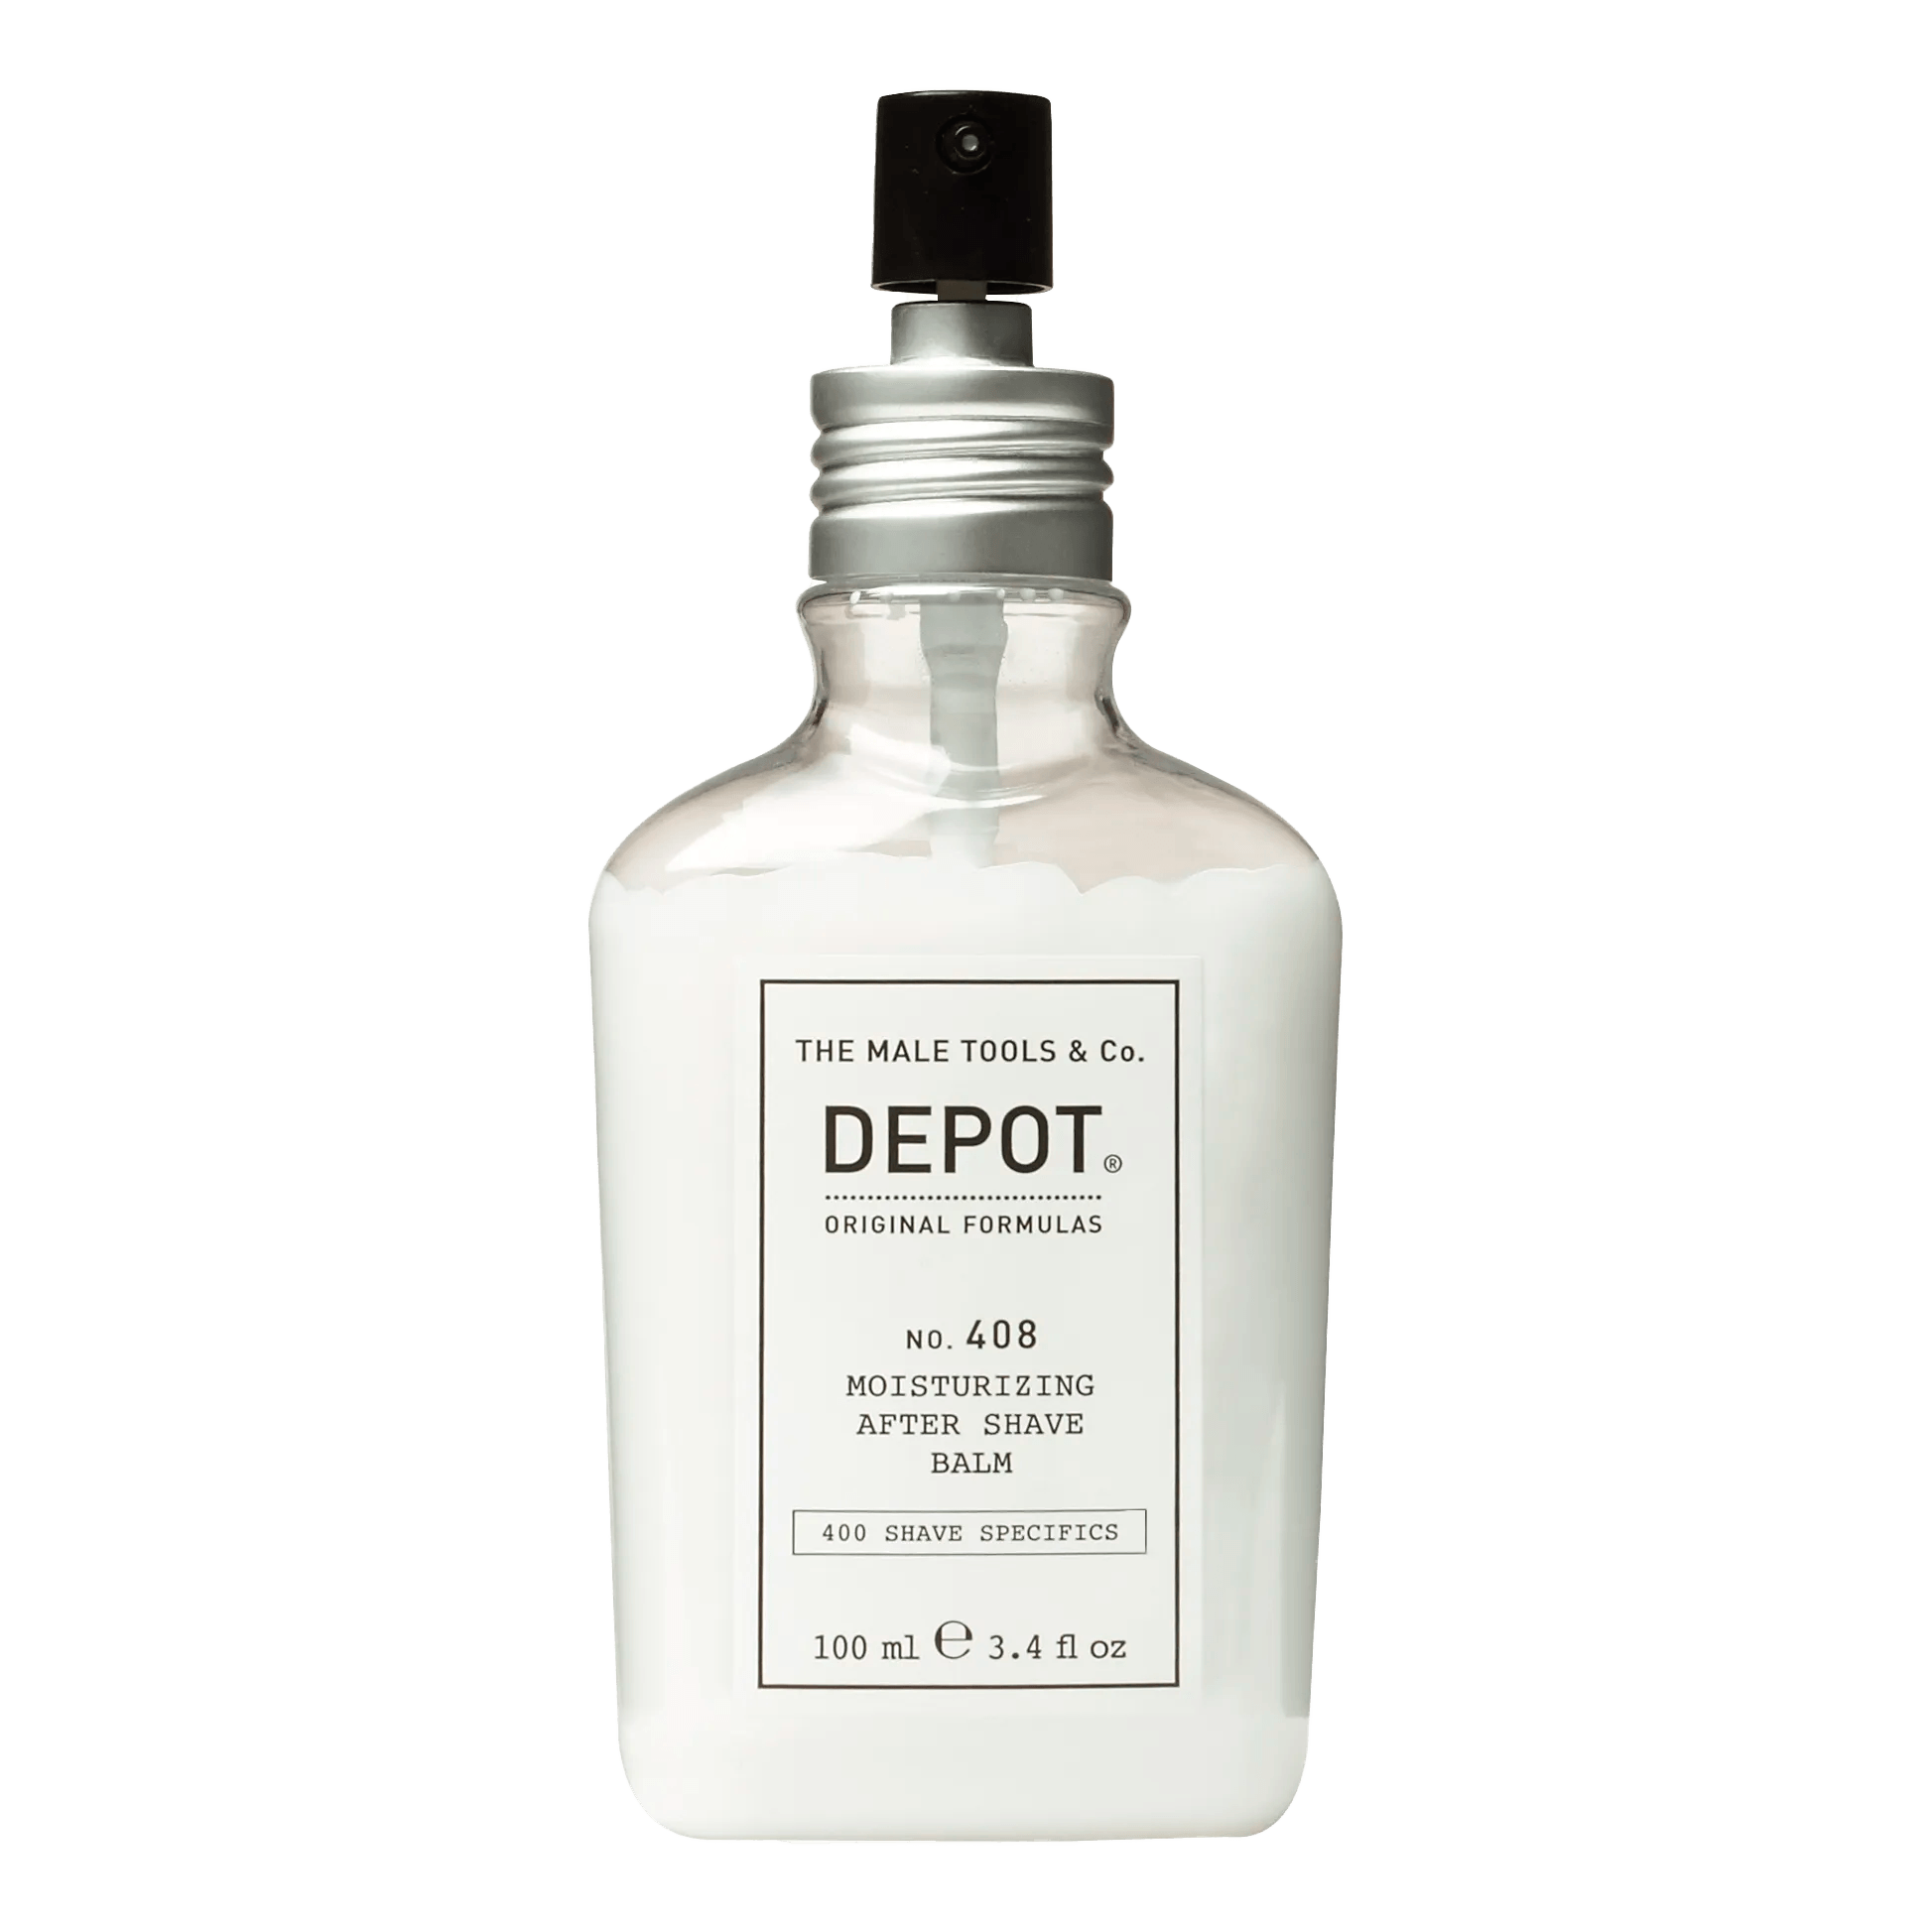 Depot No. 408 Moisturizing After Shave Balm - Classic Cologne 100 ml